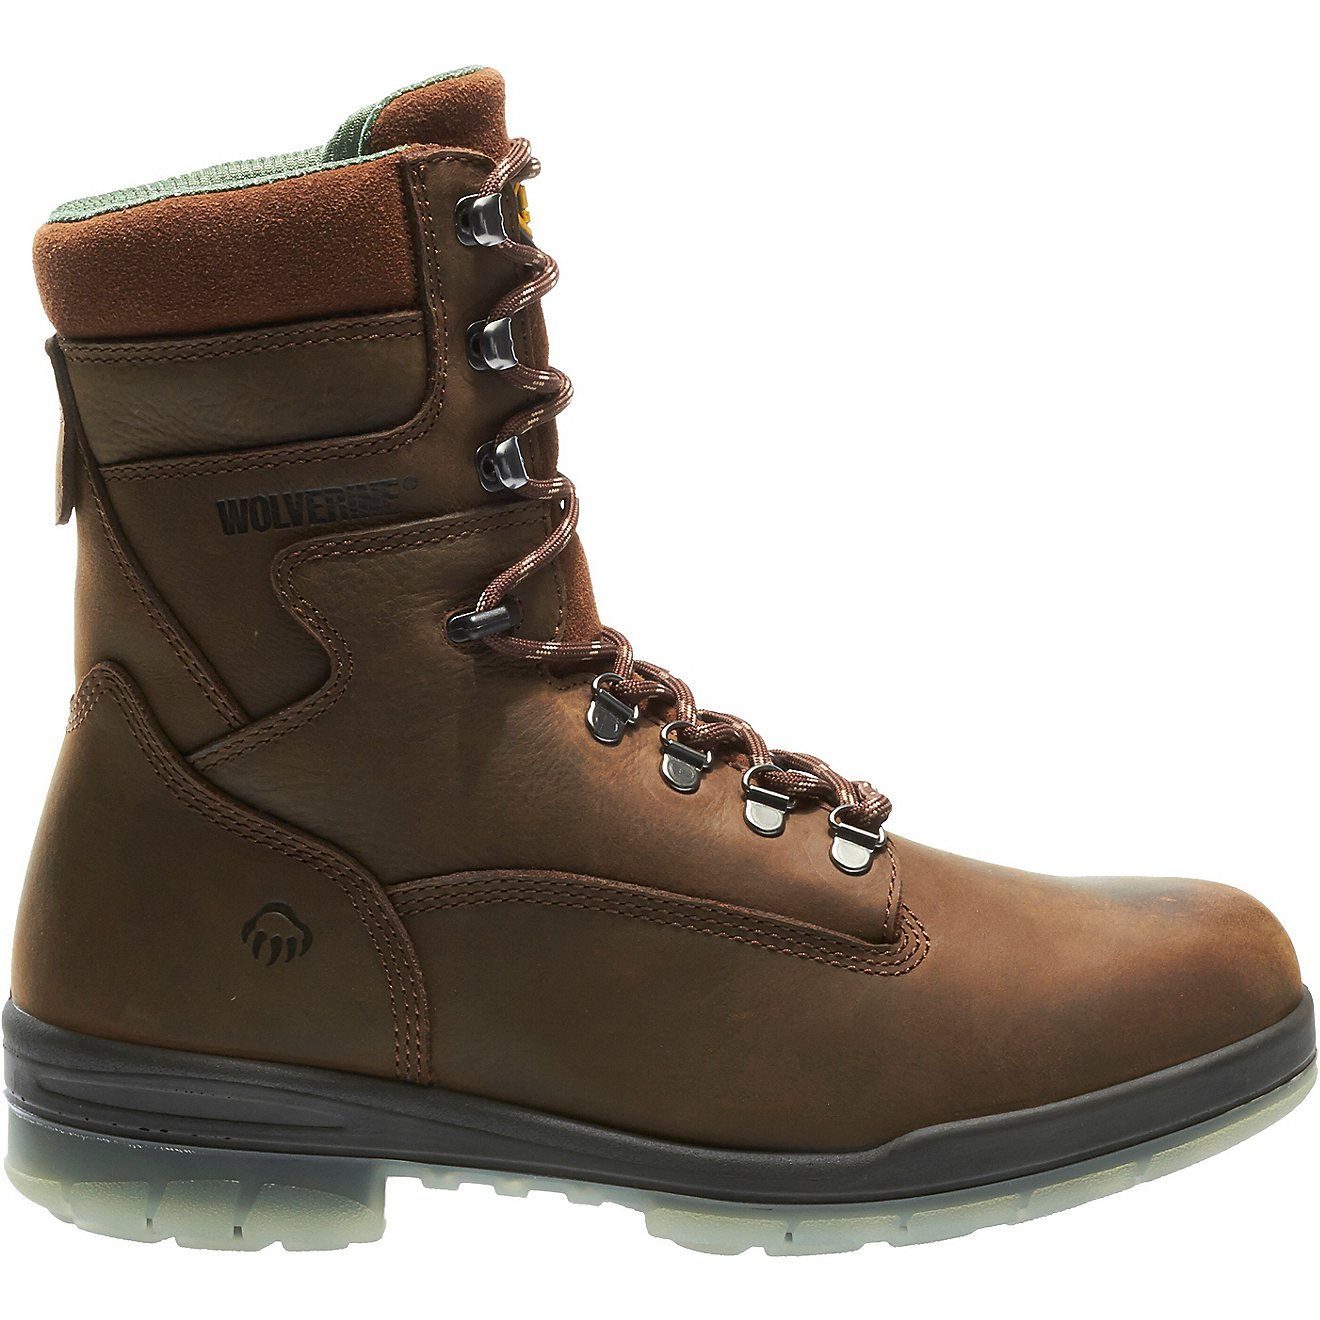 Wolverine Men's DuraShock Insulated EH Lace Up Work Boots                                                                        - view number 2